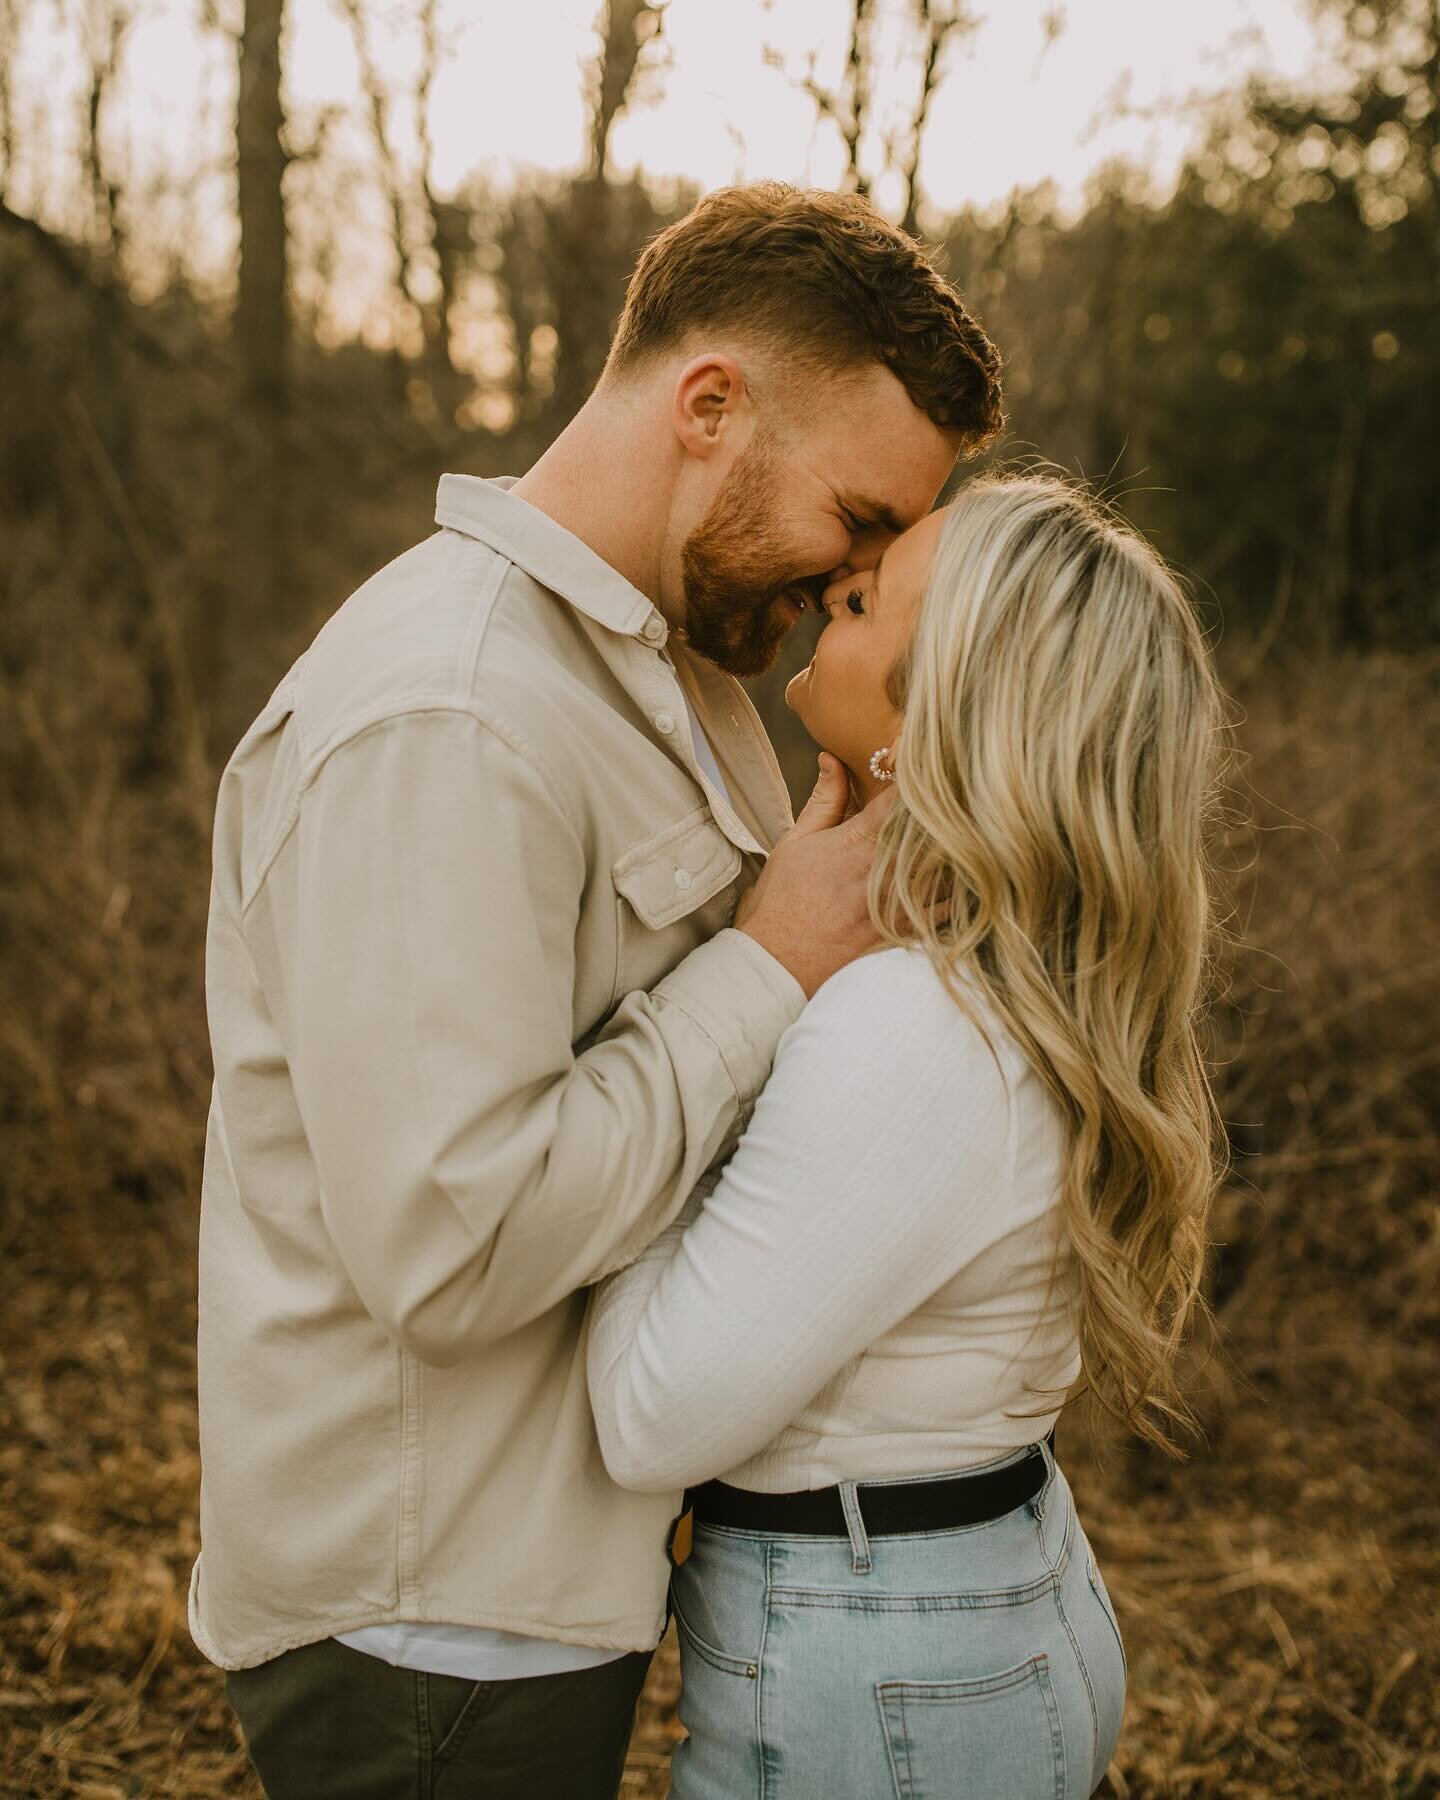 I loved photographing these two last week!! It was such a gorgeous day for early March. ☀️